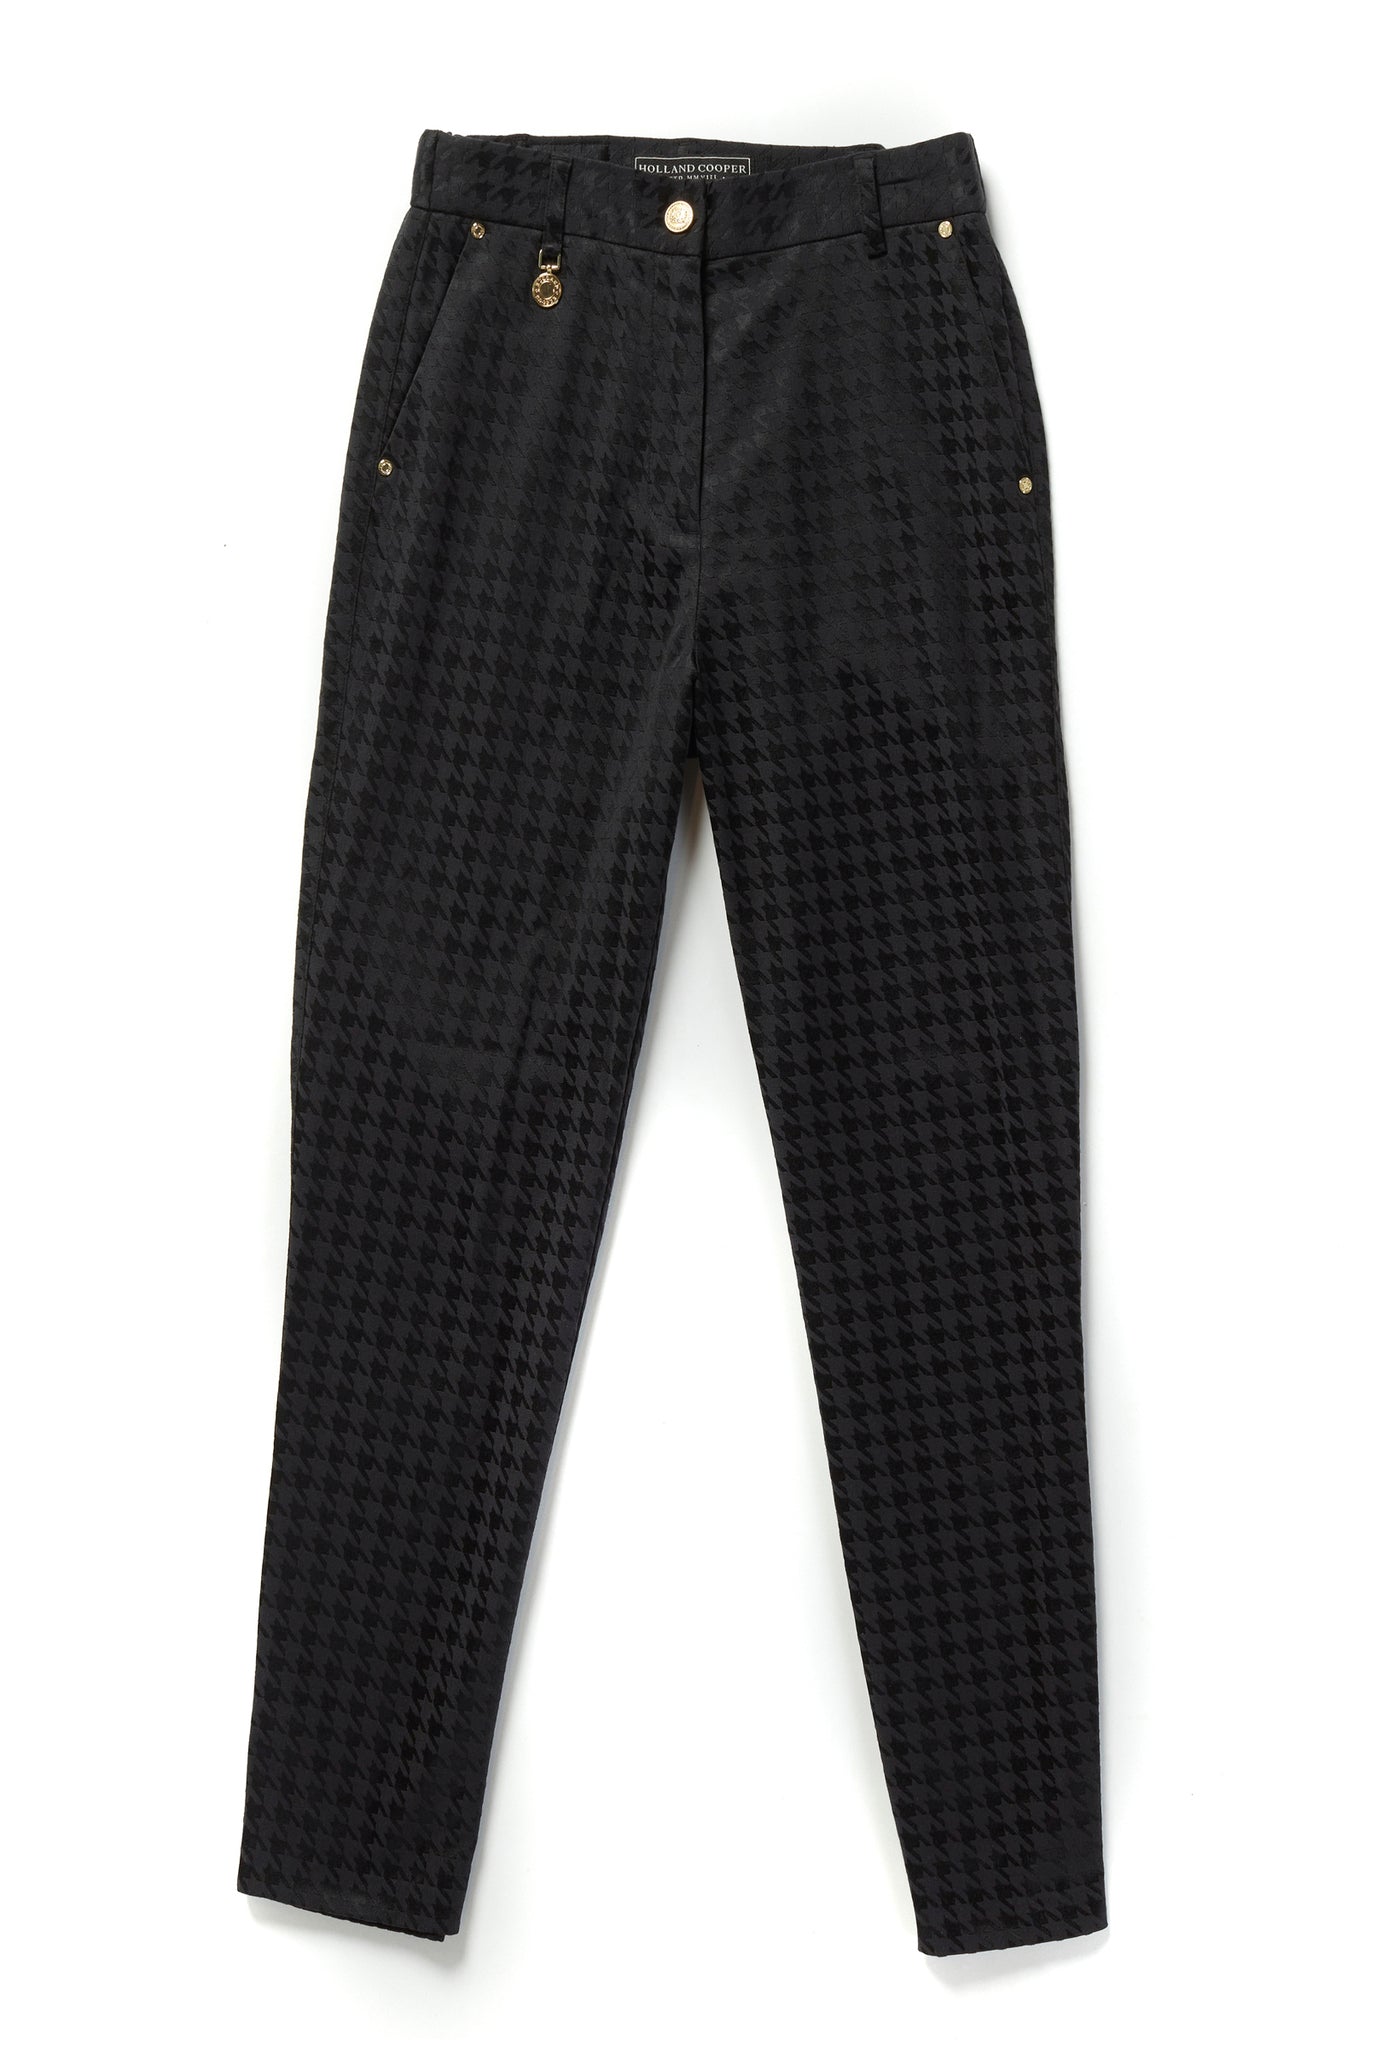 Holland Cooper Bexley Tailored Trouser in Houndstooth Jacquard